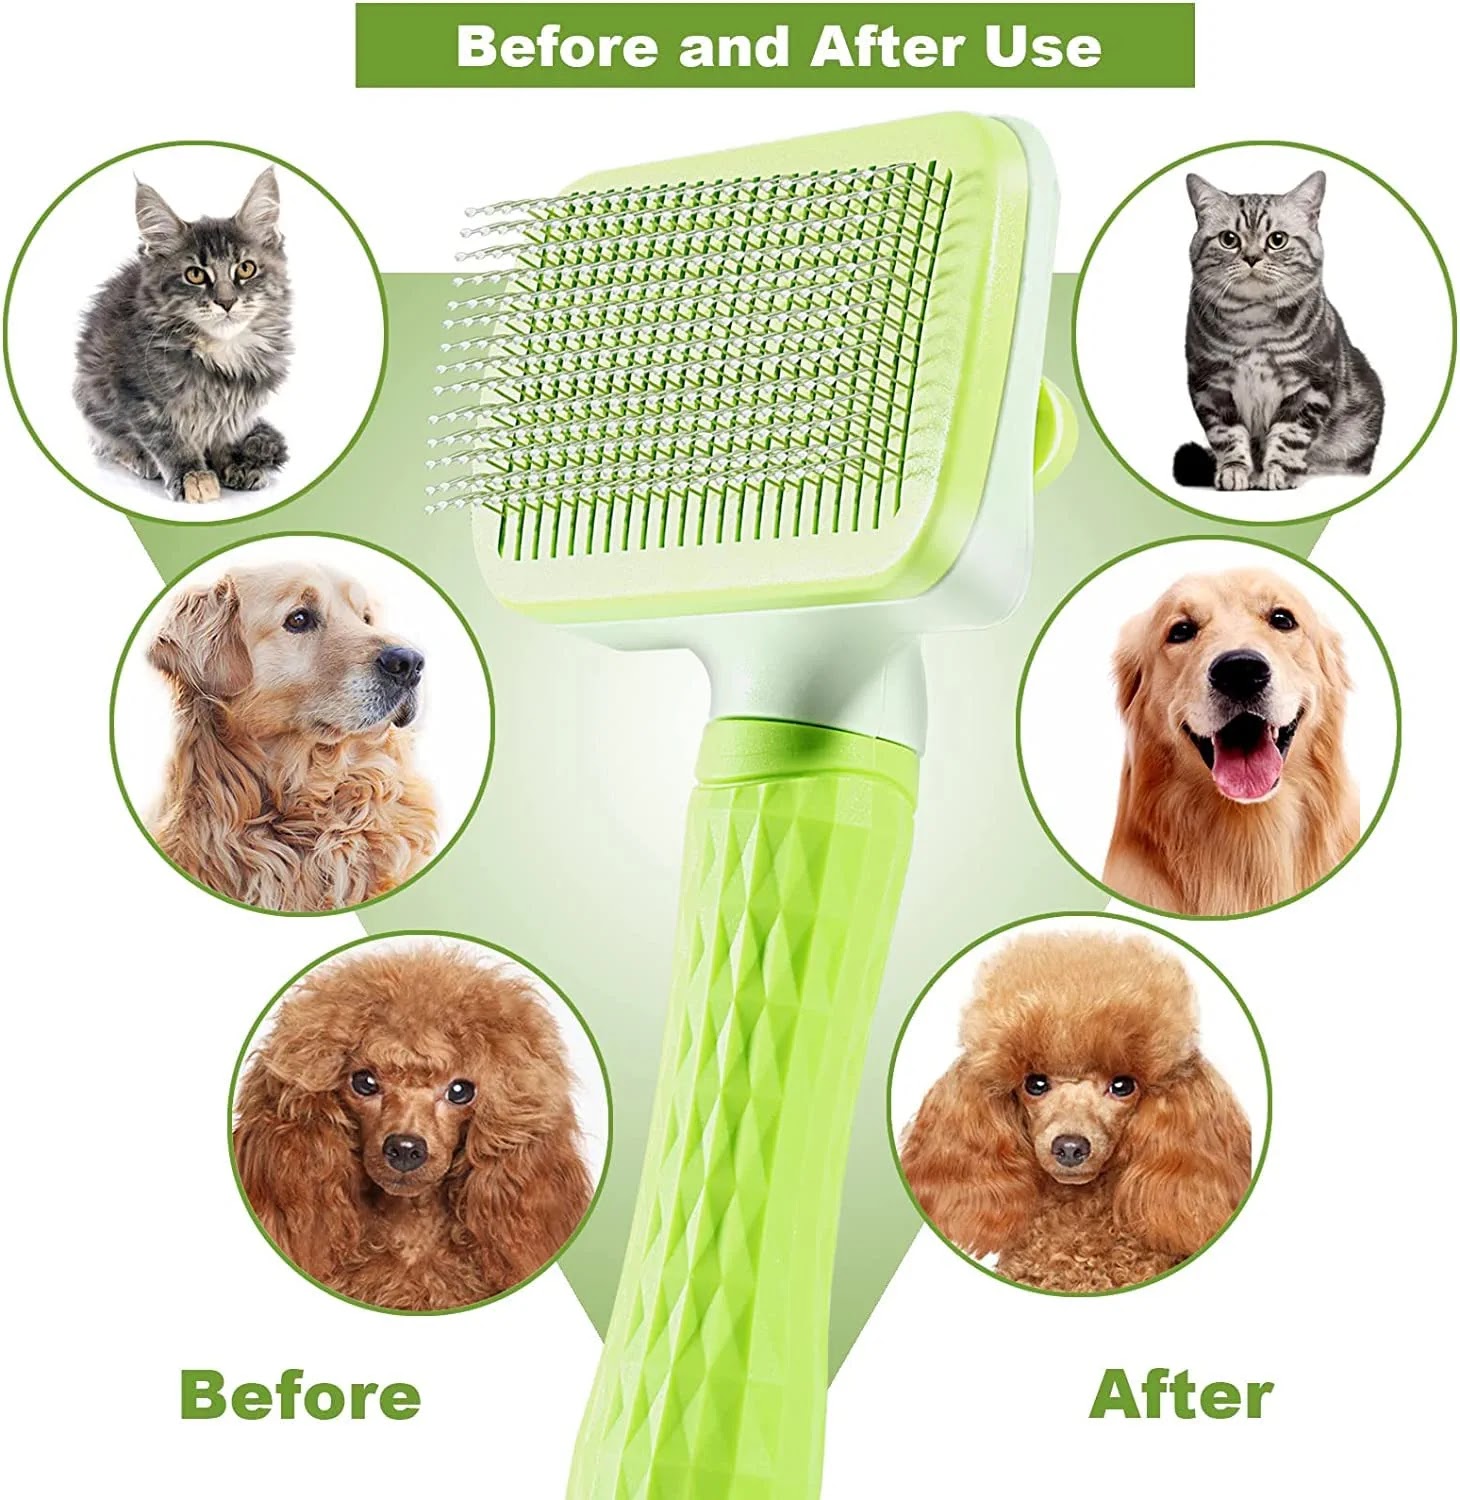 Self-Cleaning Cat Brush For Maine Coons